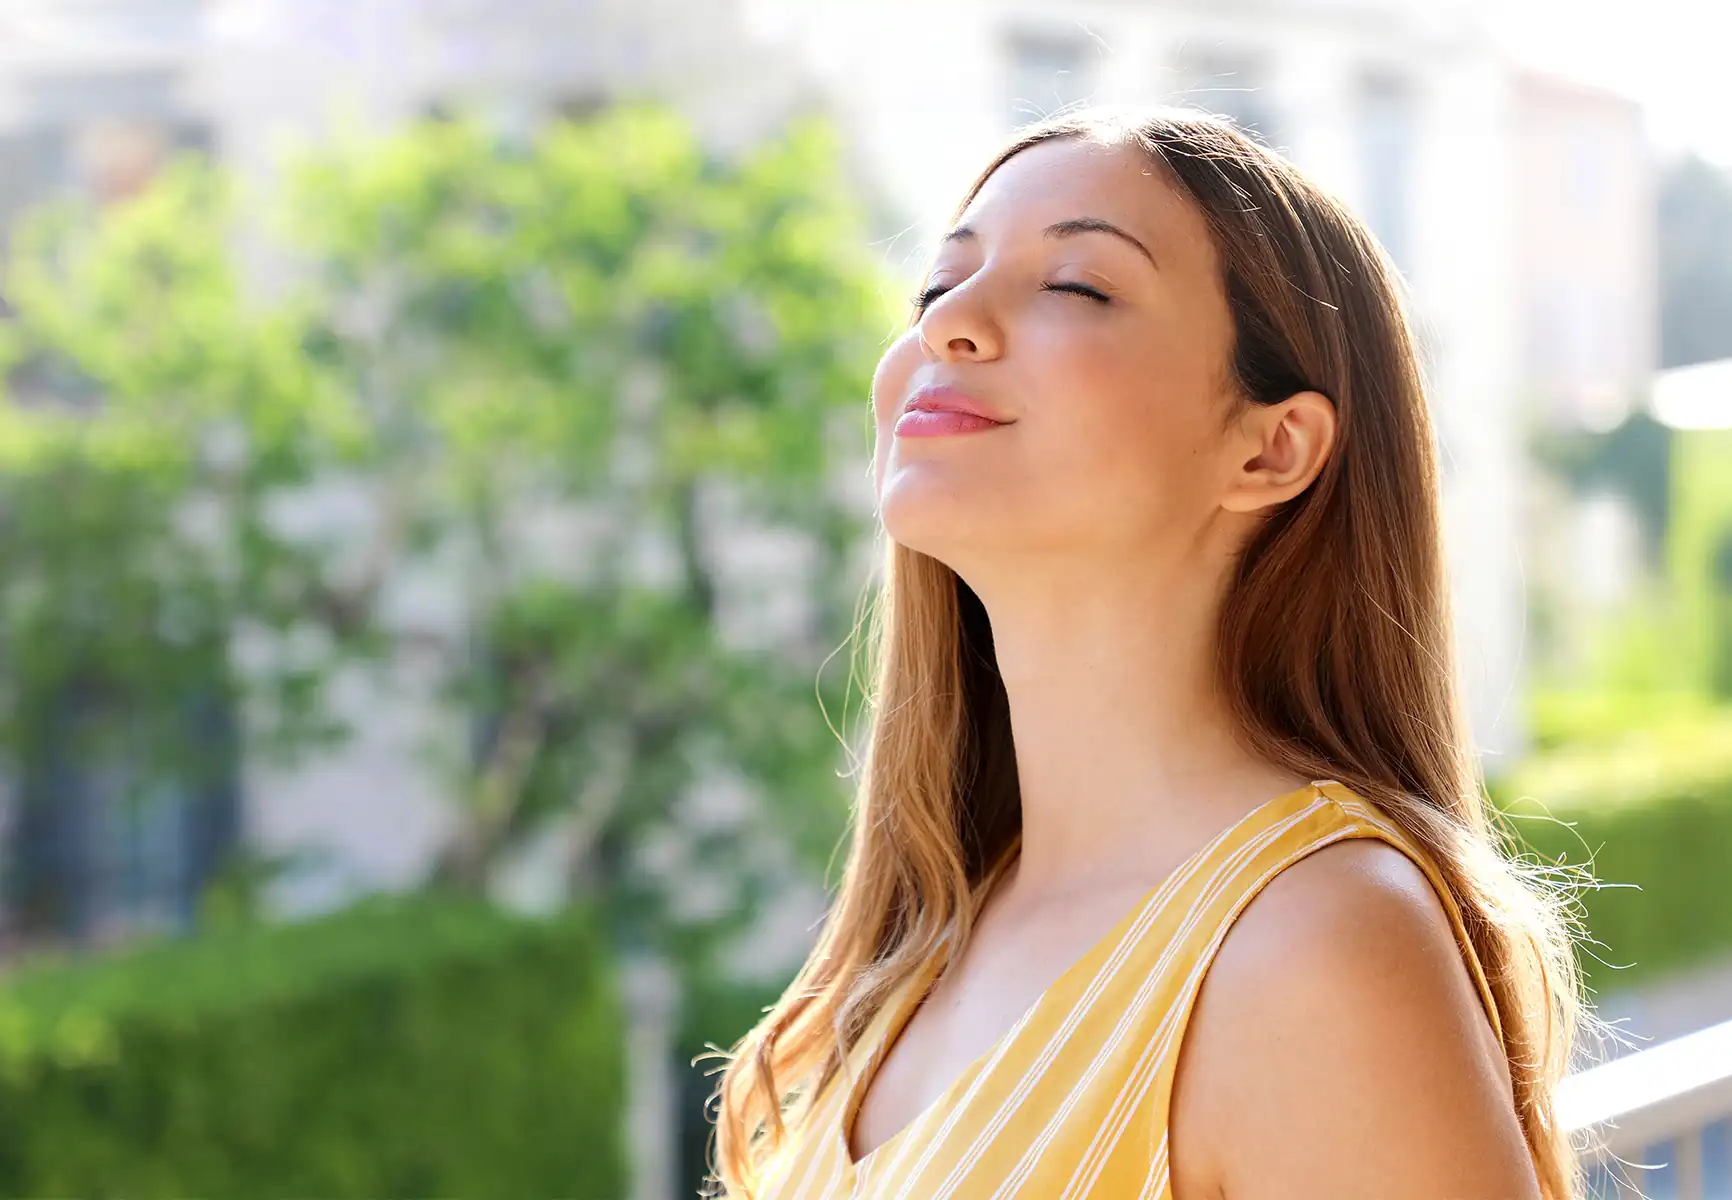 Relaxed woman on balcony breathing in